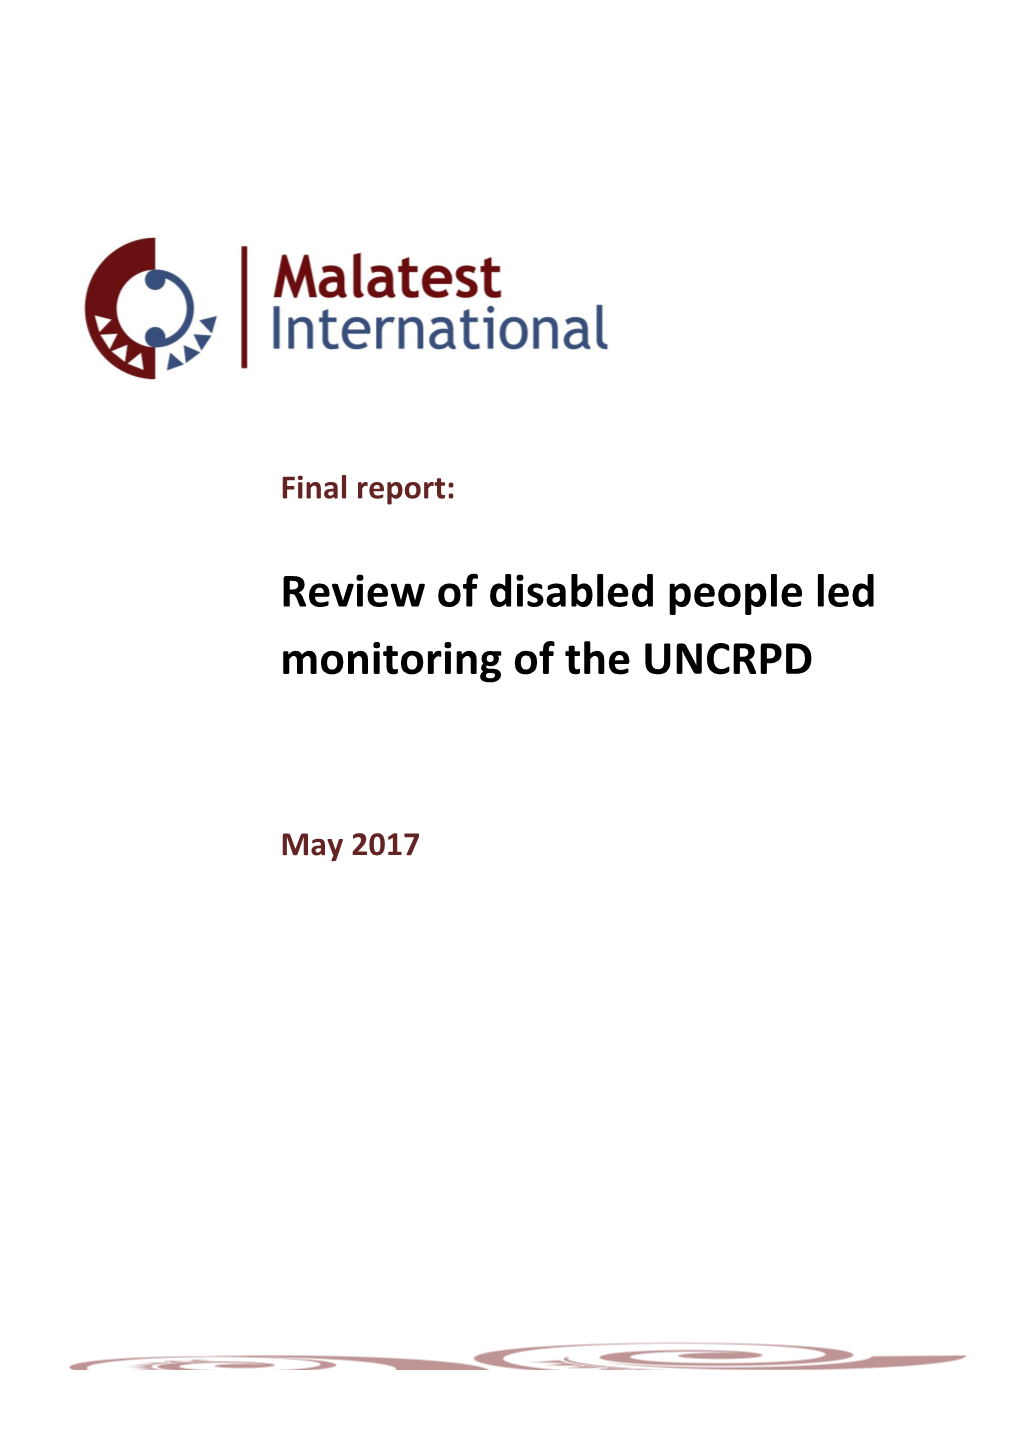 Review of Disabled People Led Monitoring of the UNCRPD